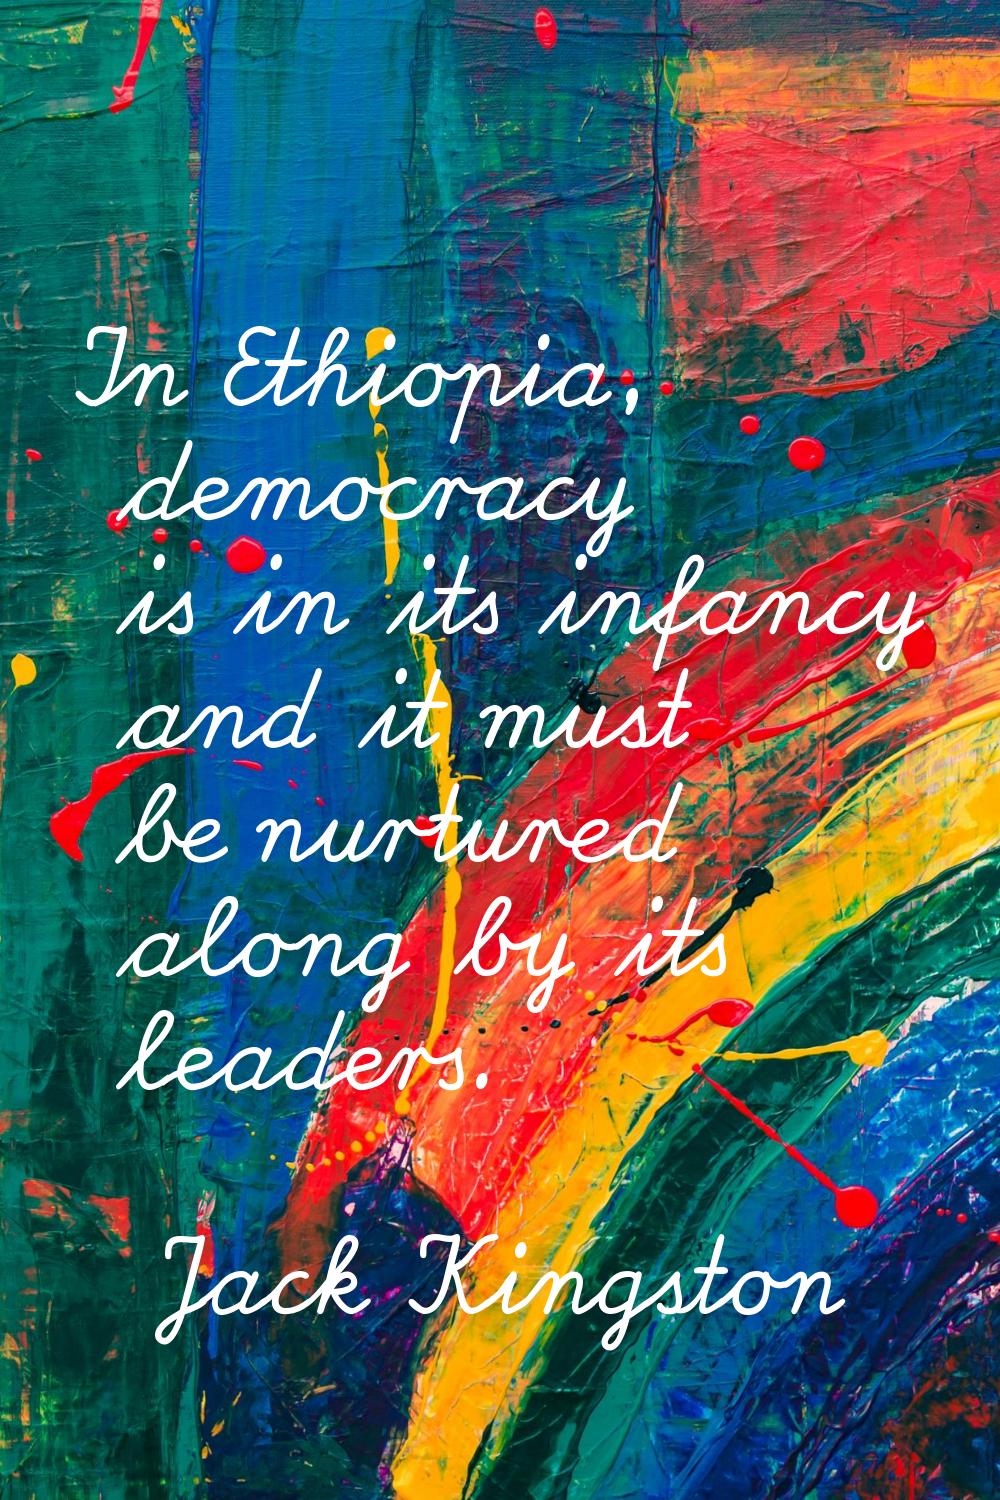 In Ethiopia, democracy is in its infancy and it must be nurtured along by its leaders.